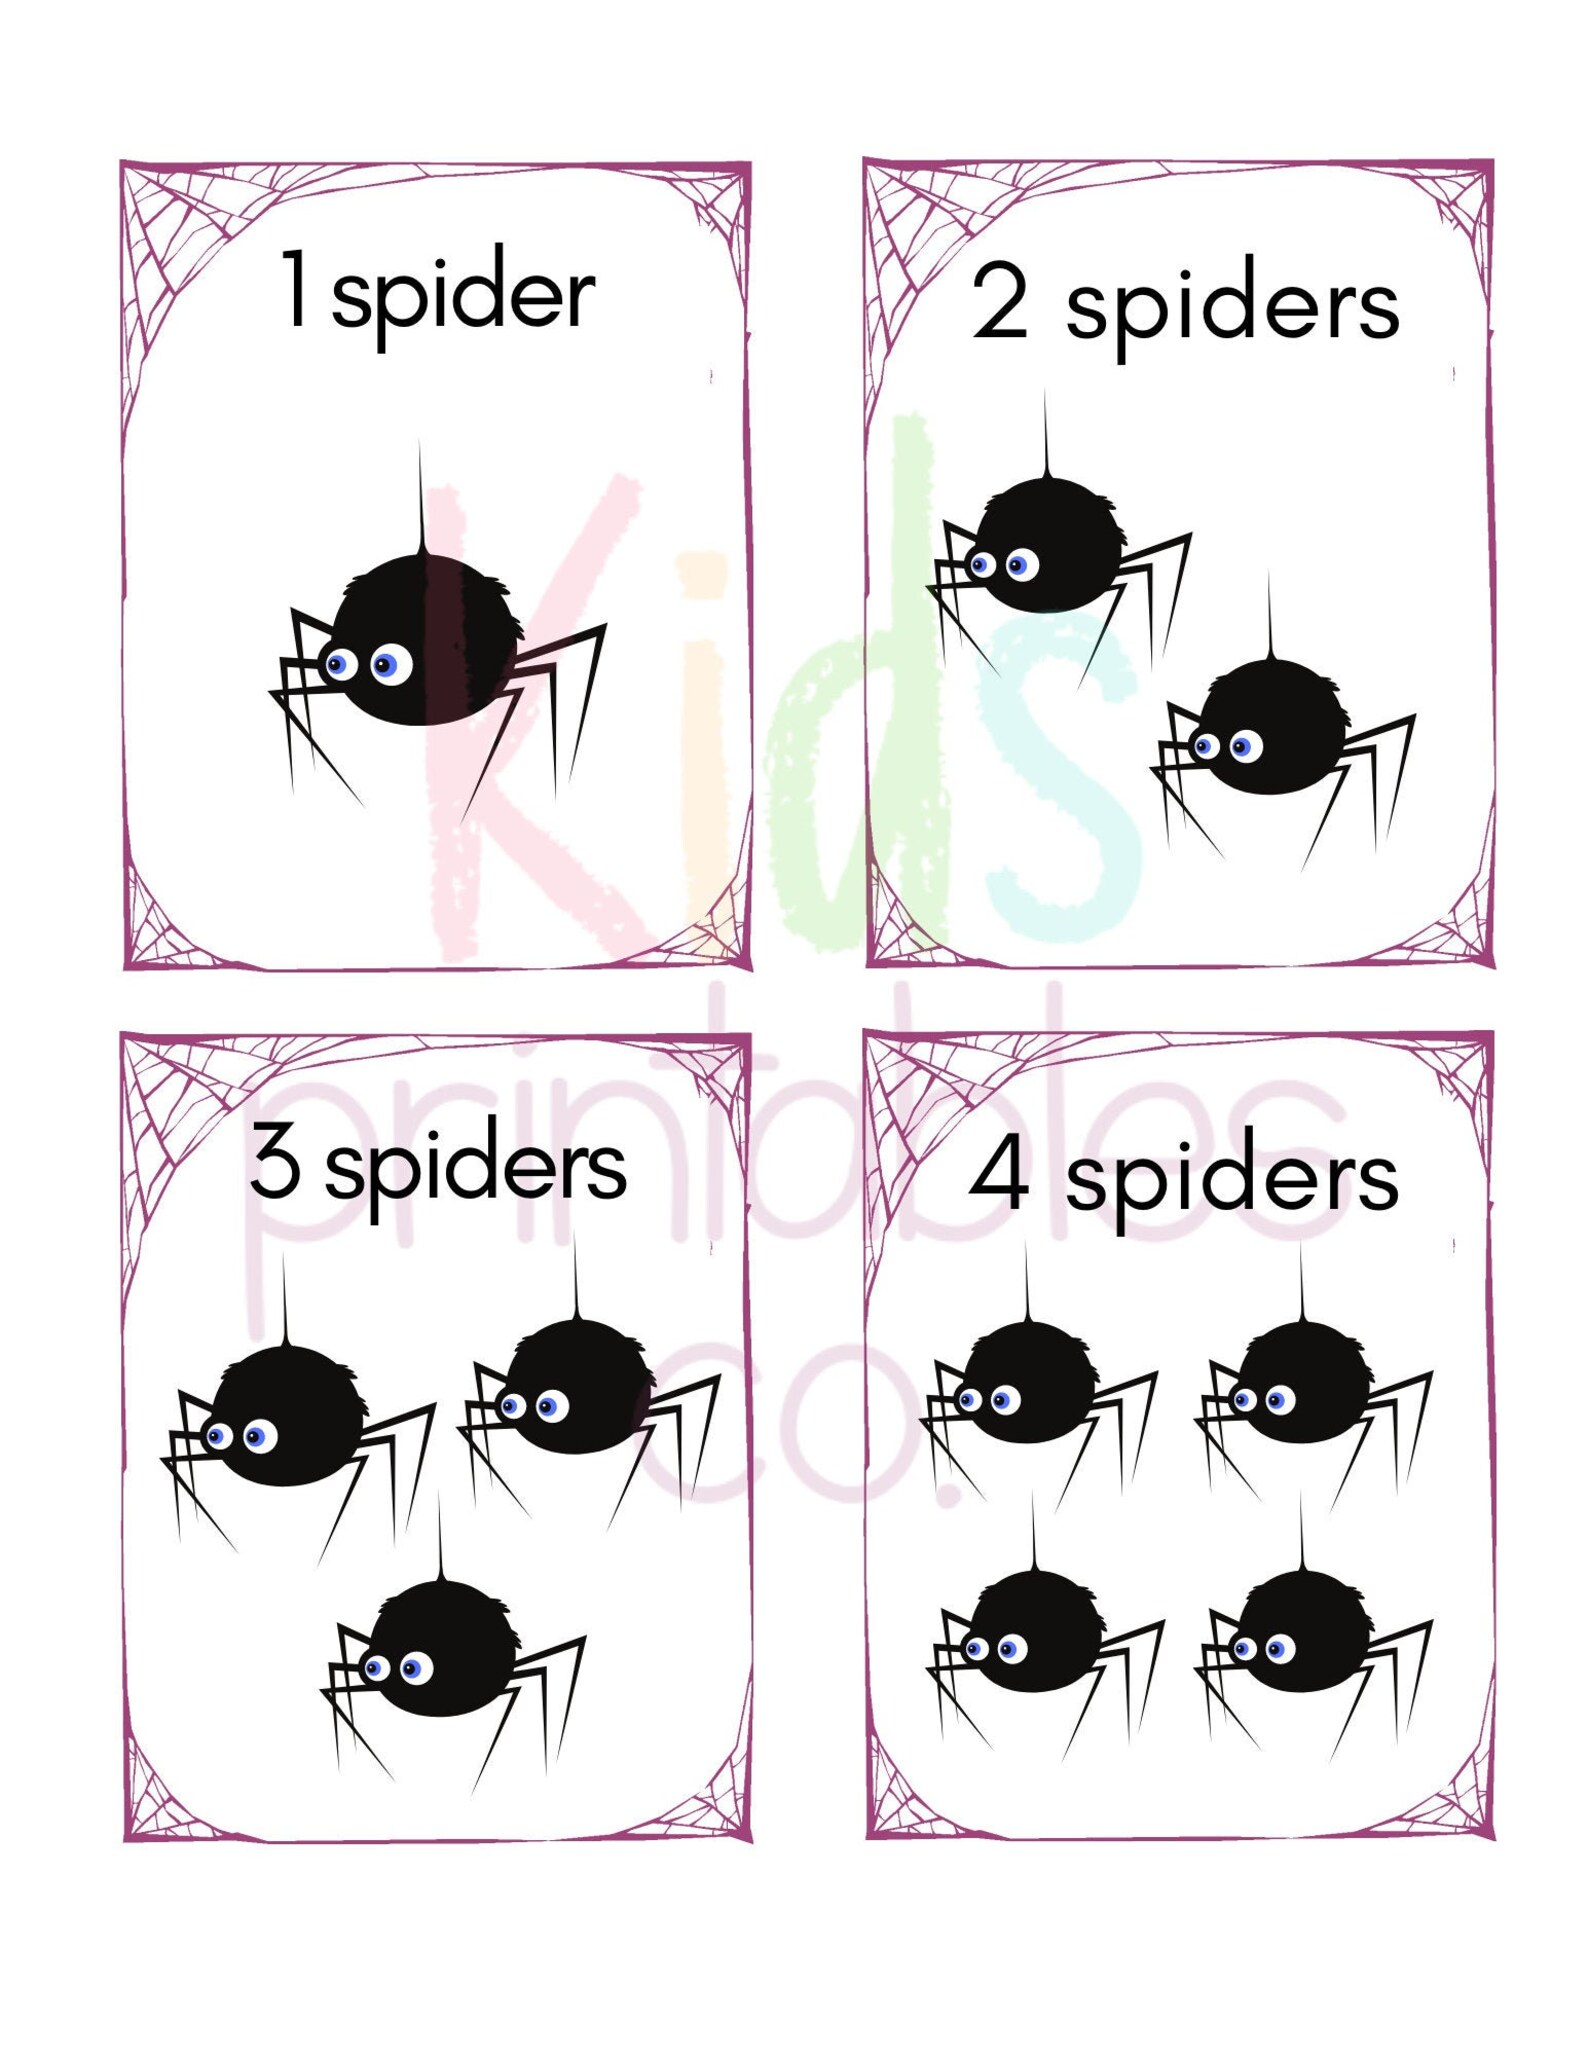 spider-numbers-cards-1-10-cute-etsy